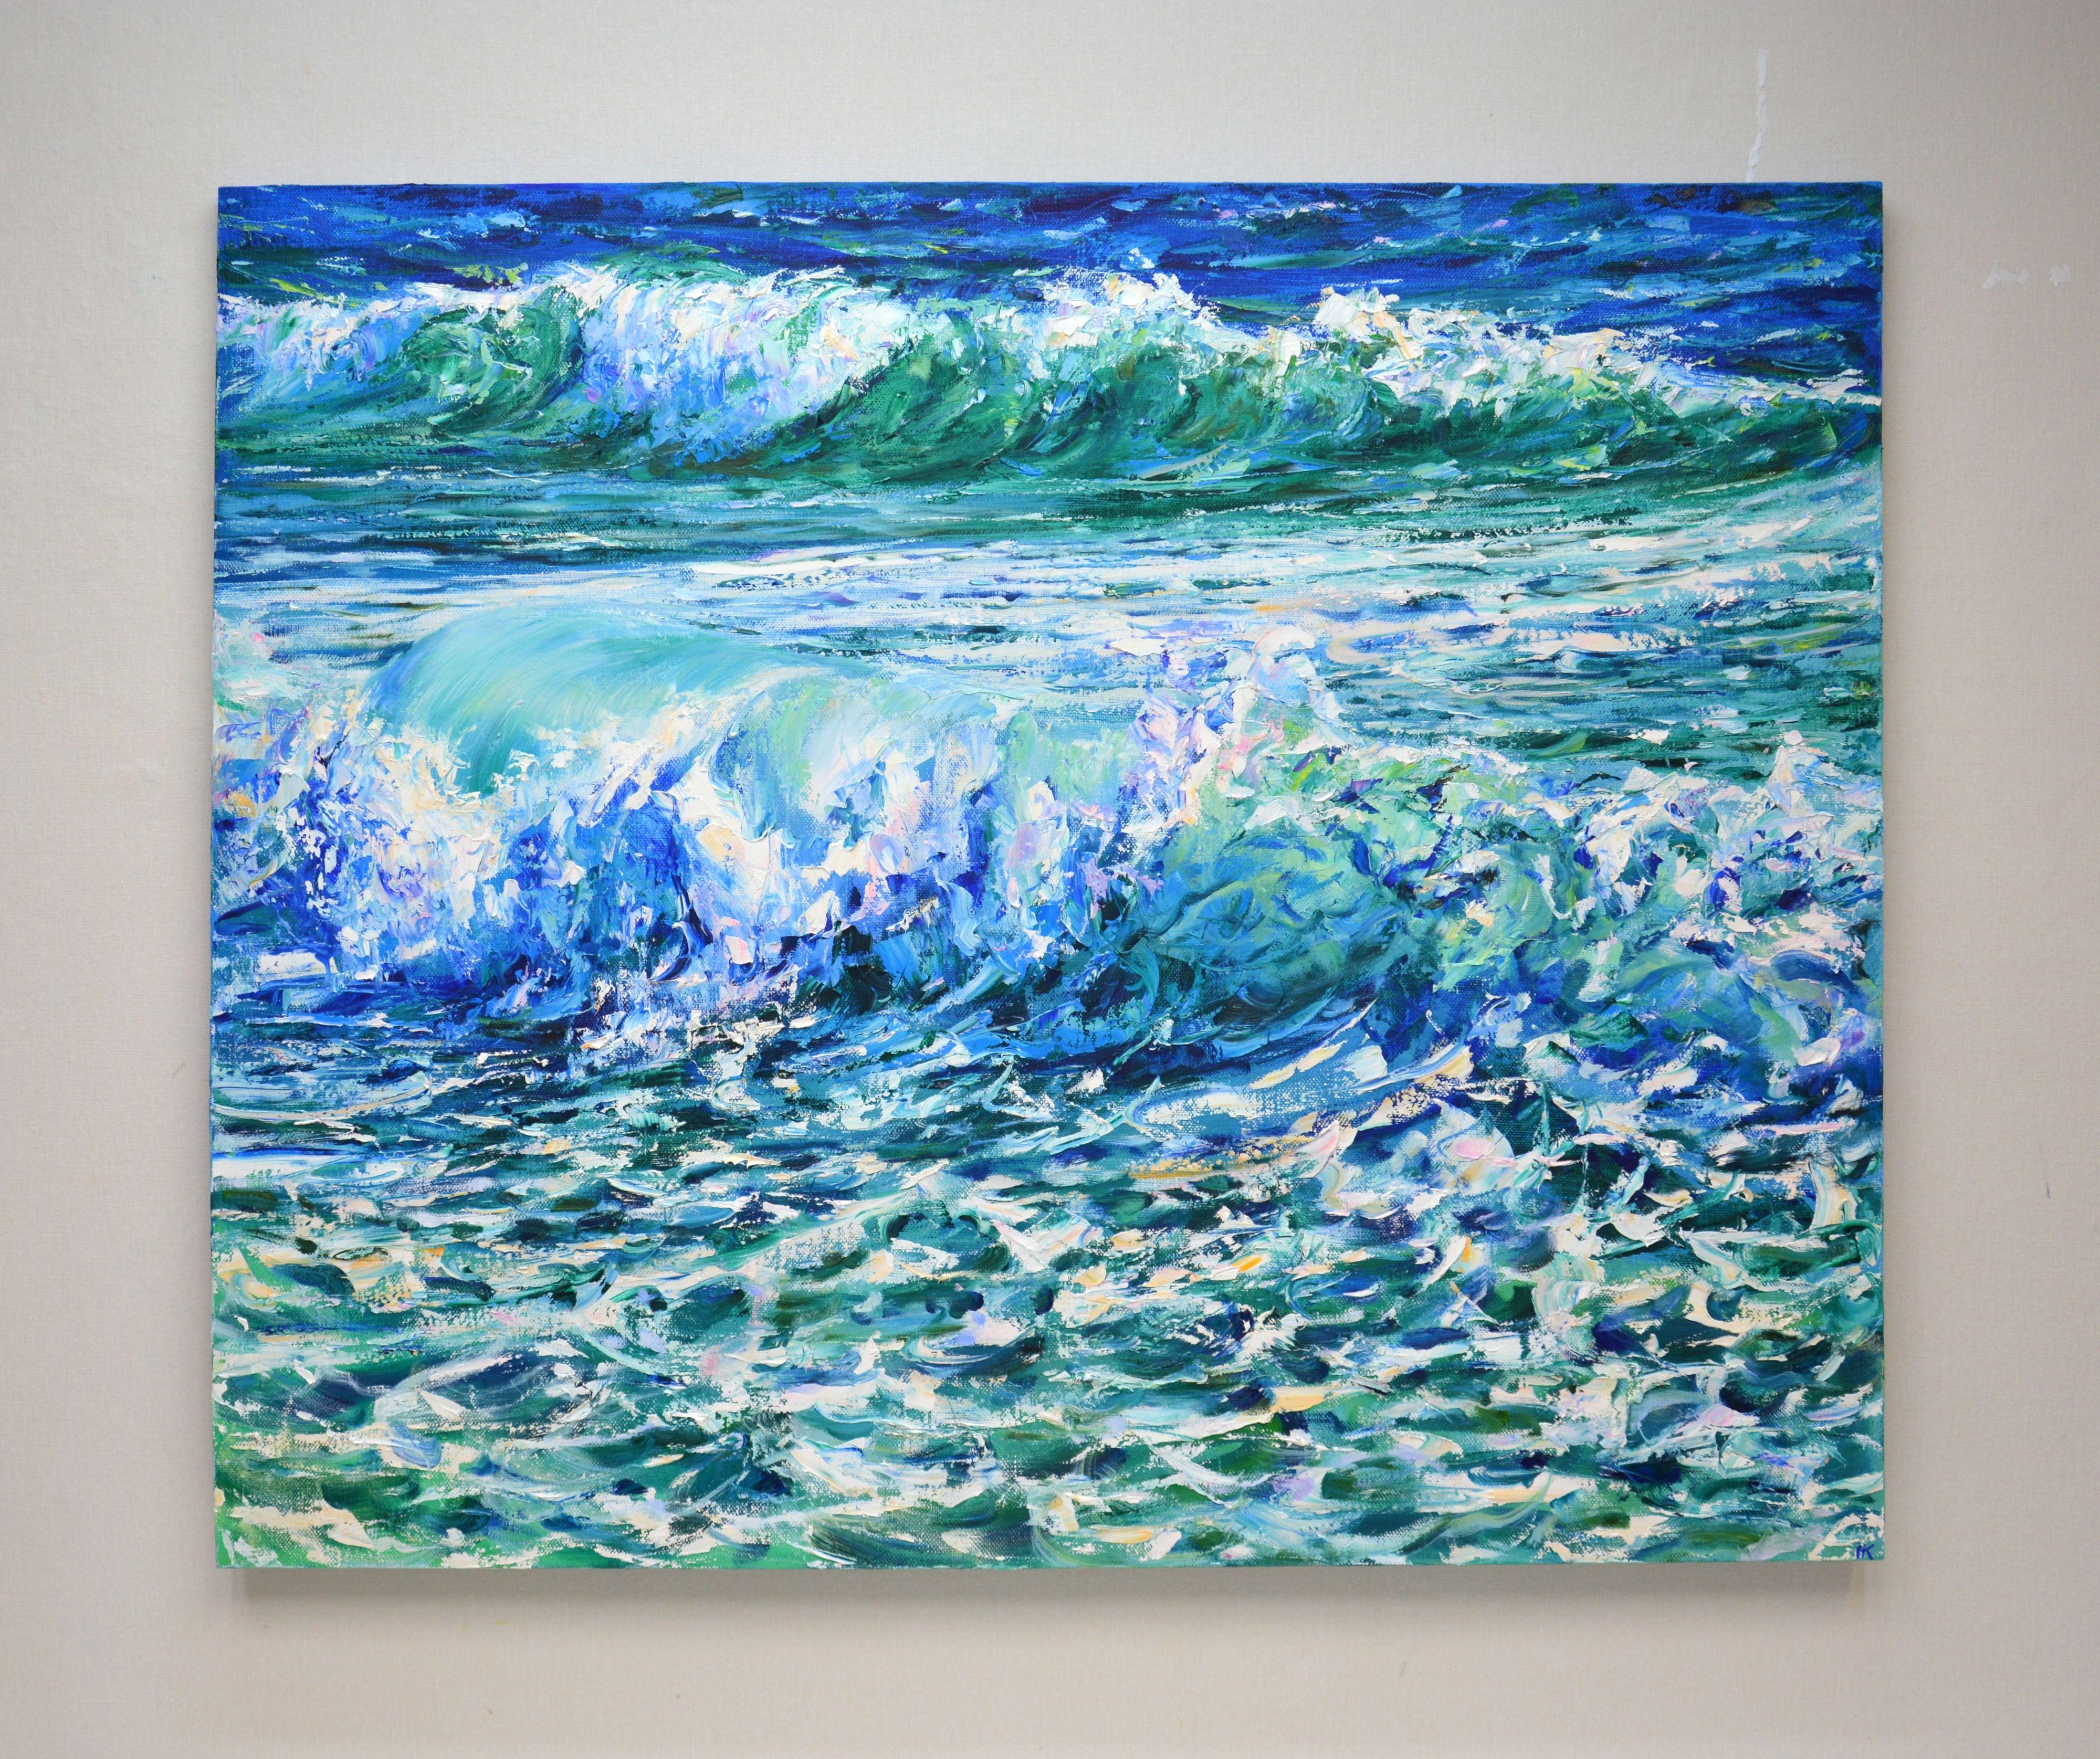 The ocean breathes with free wind, Painting, Oil on Canvas 1